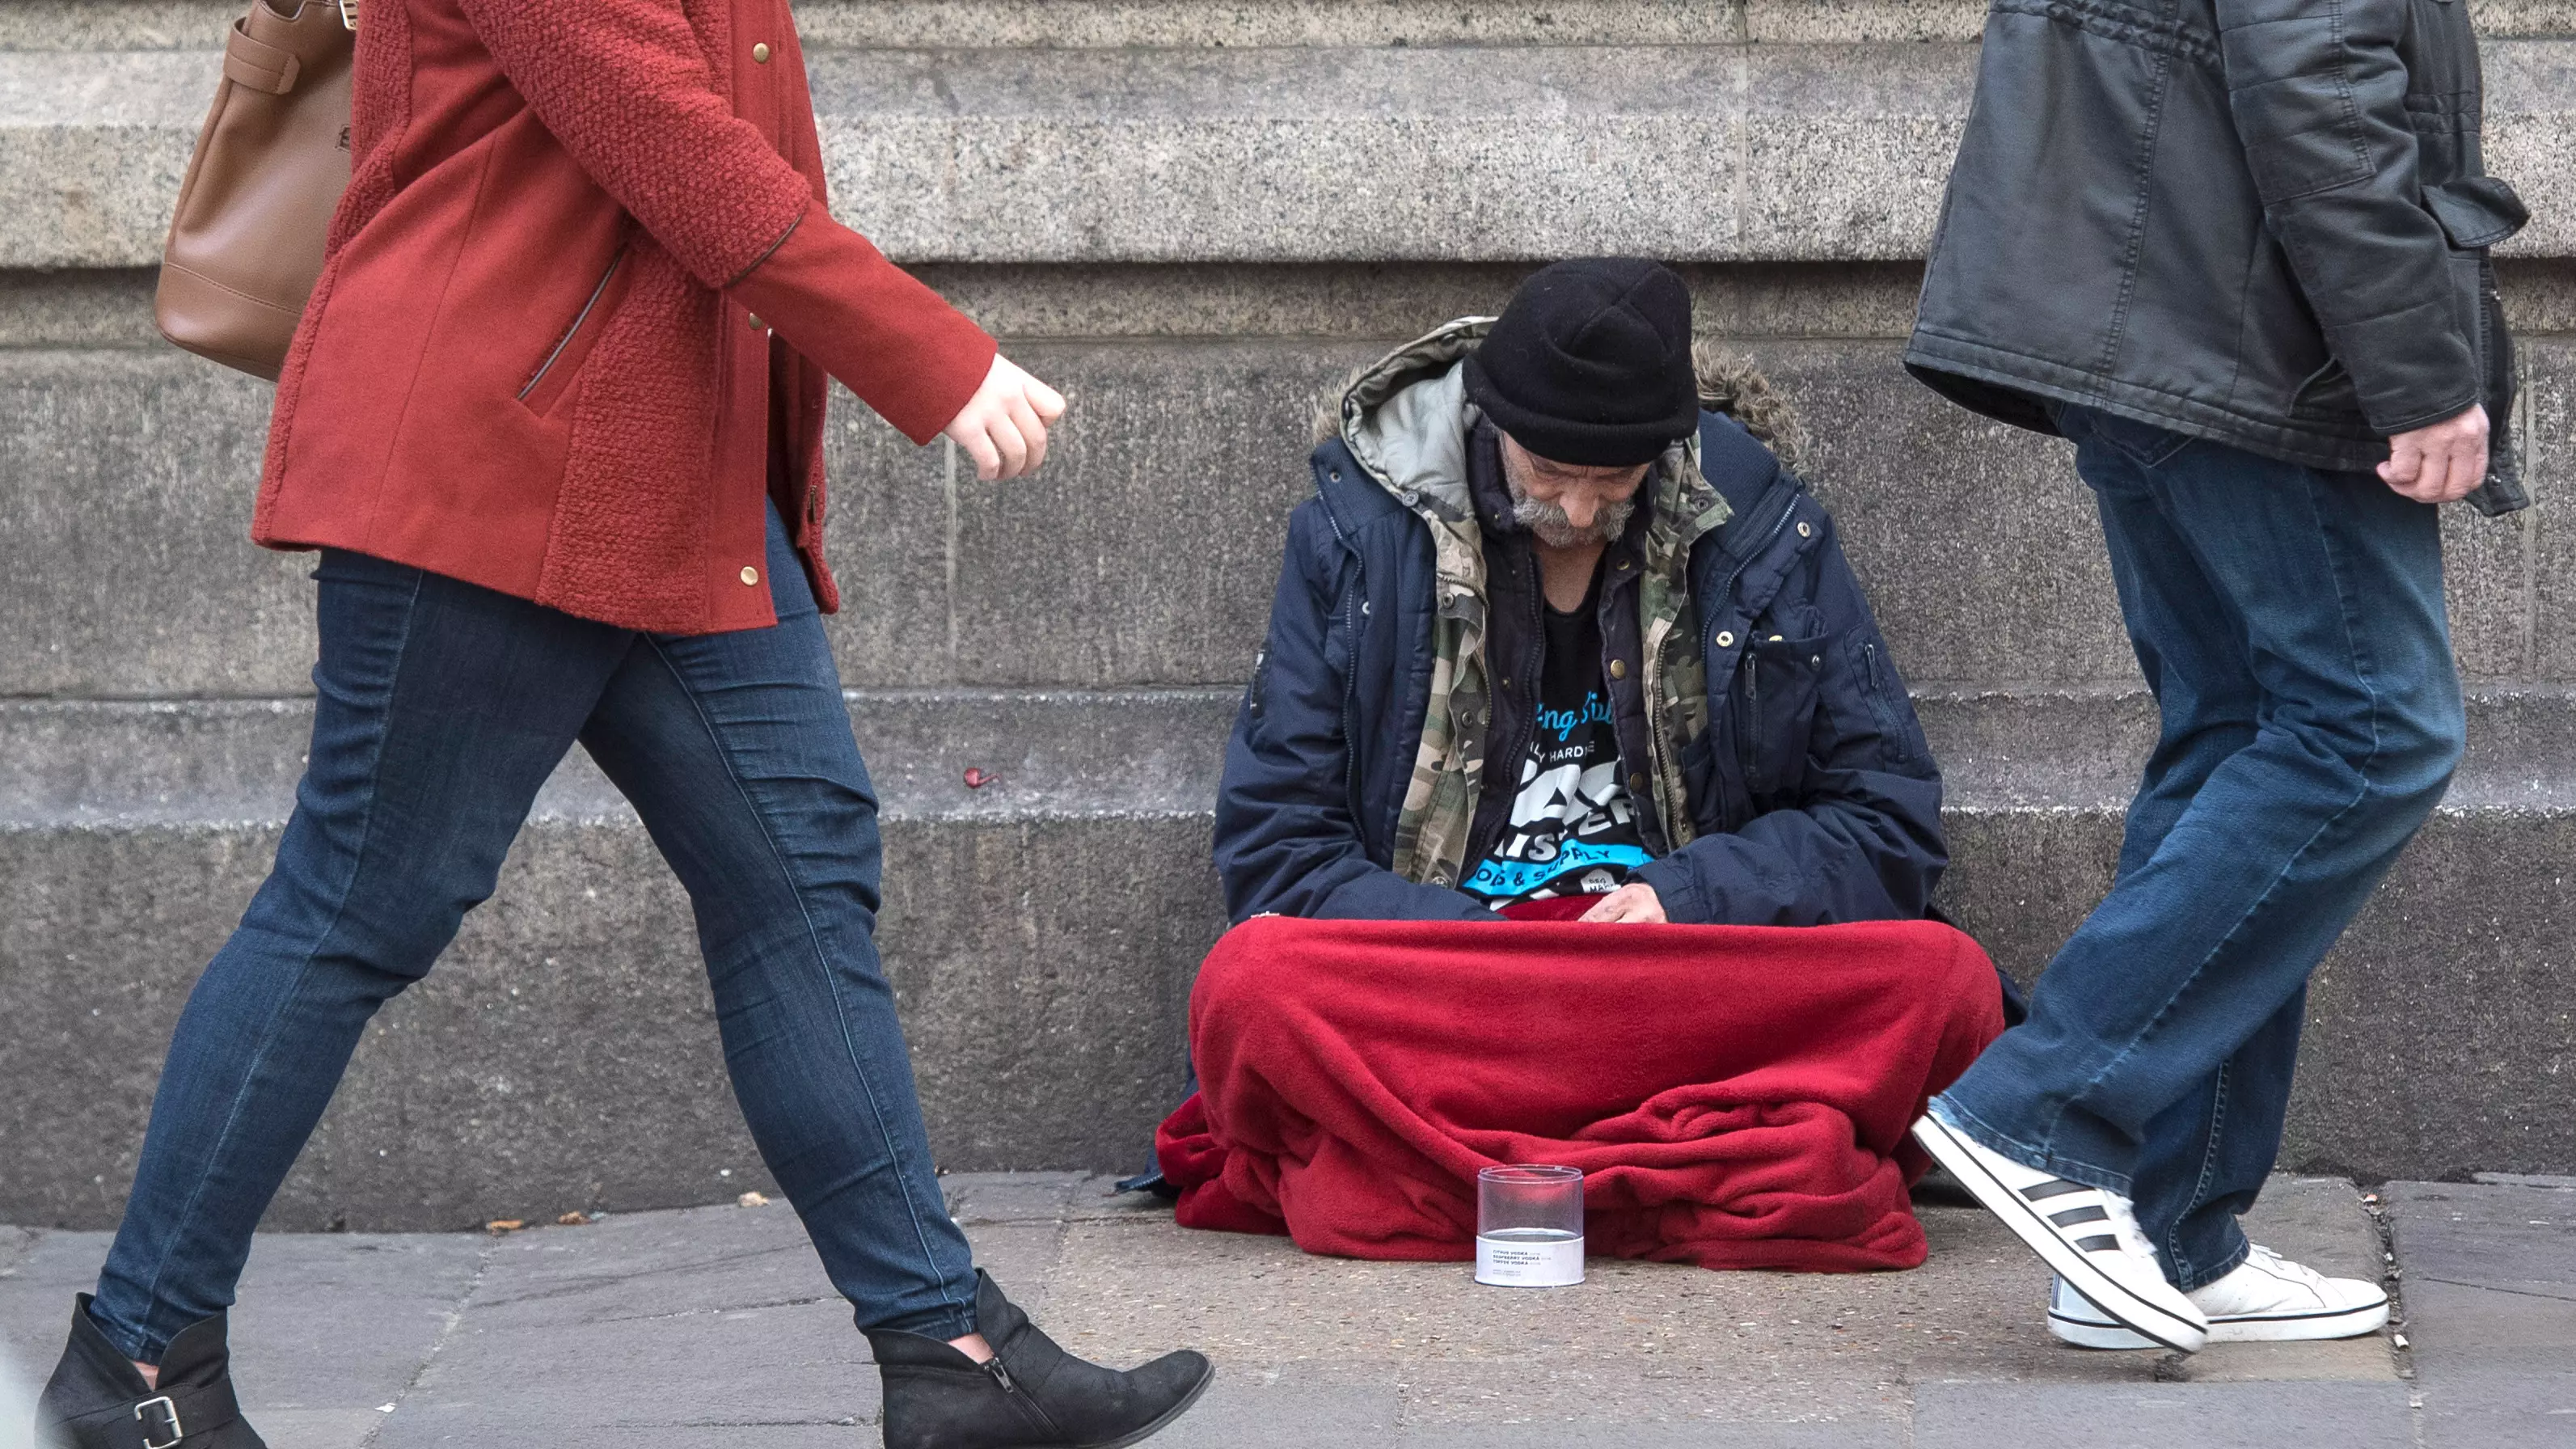 One In Every 200 People In England Is Homeless, Study Finds